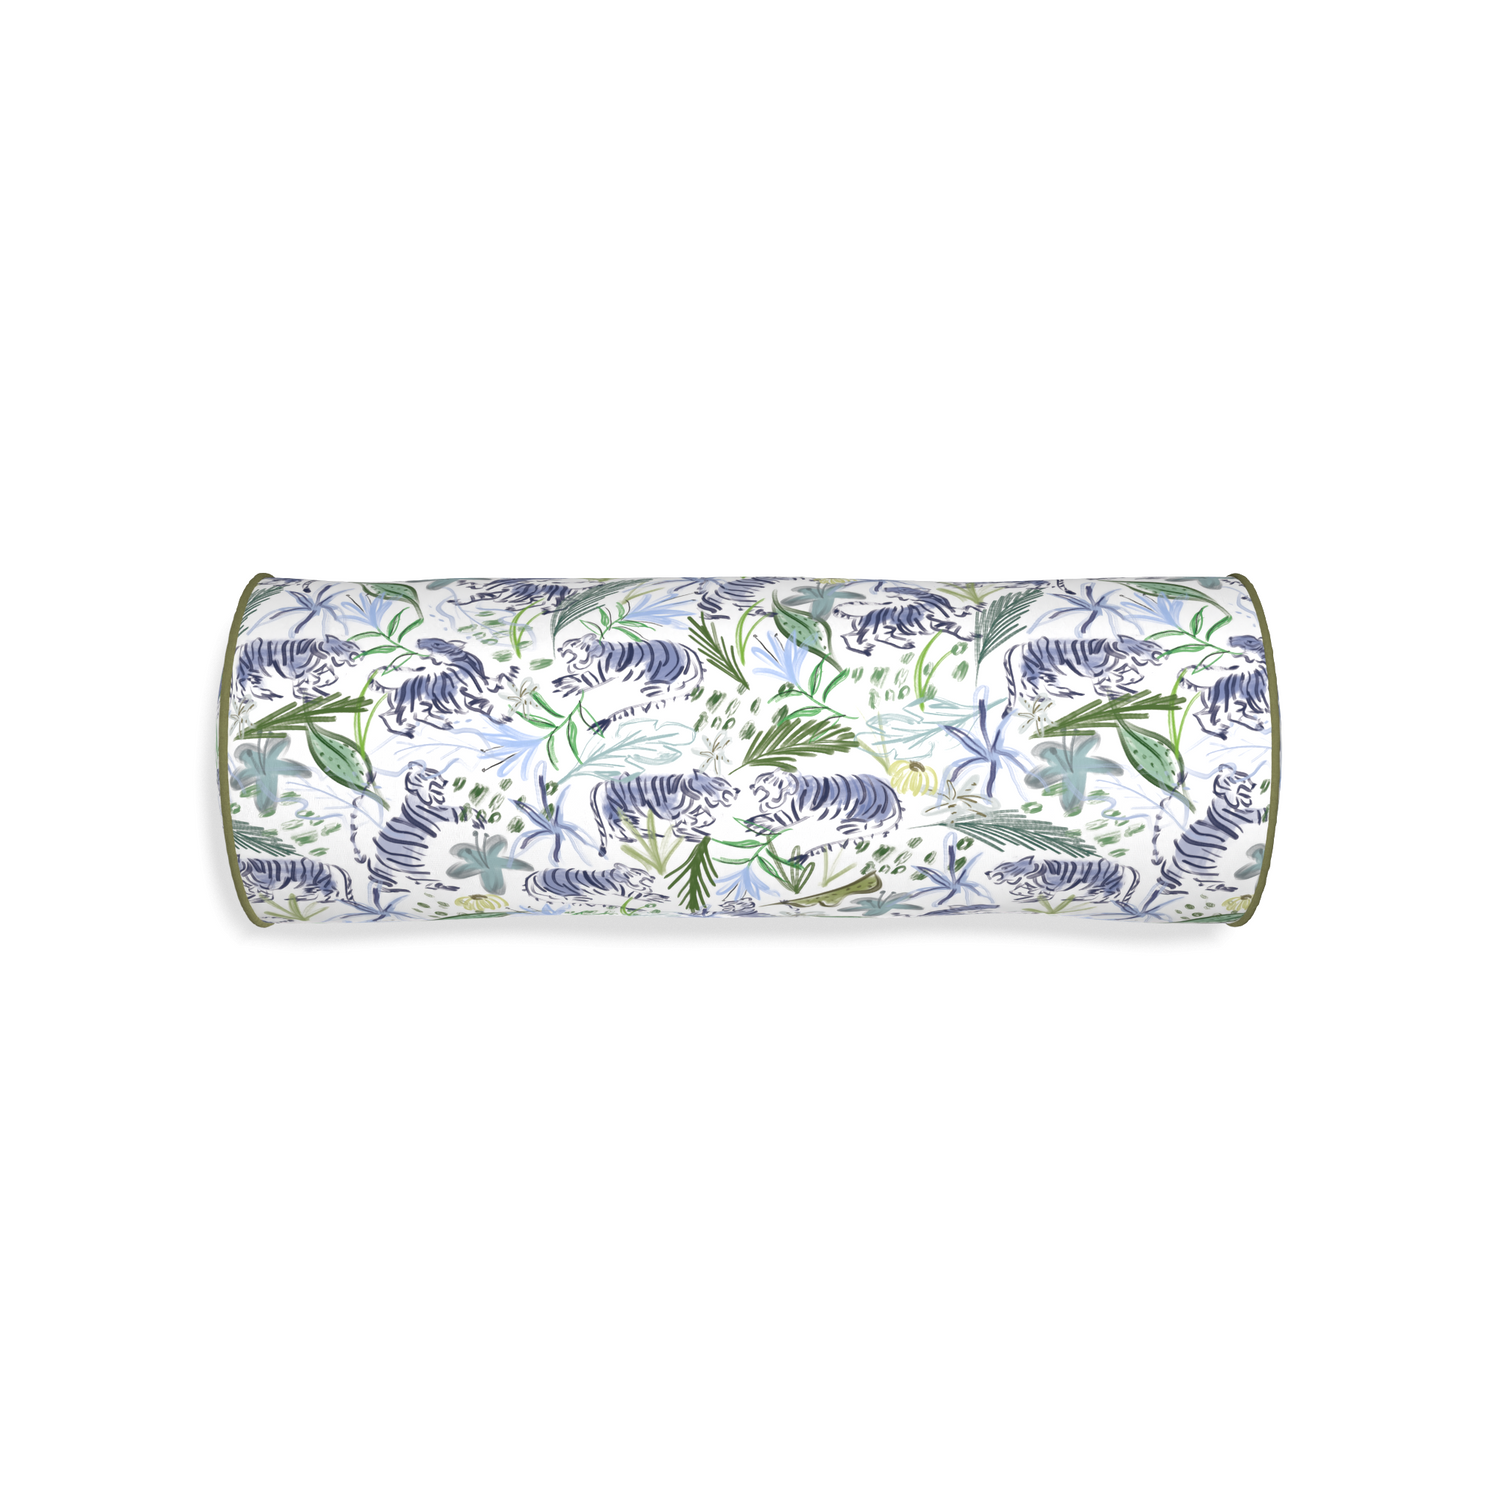 Bolster frida green custom green tigerpillow with moss piping on white background